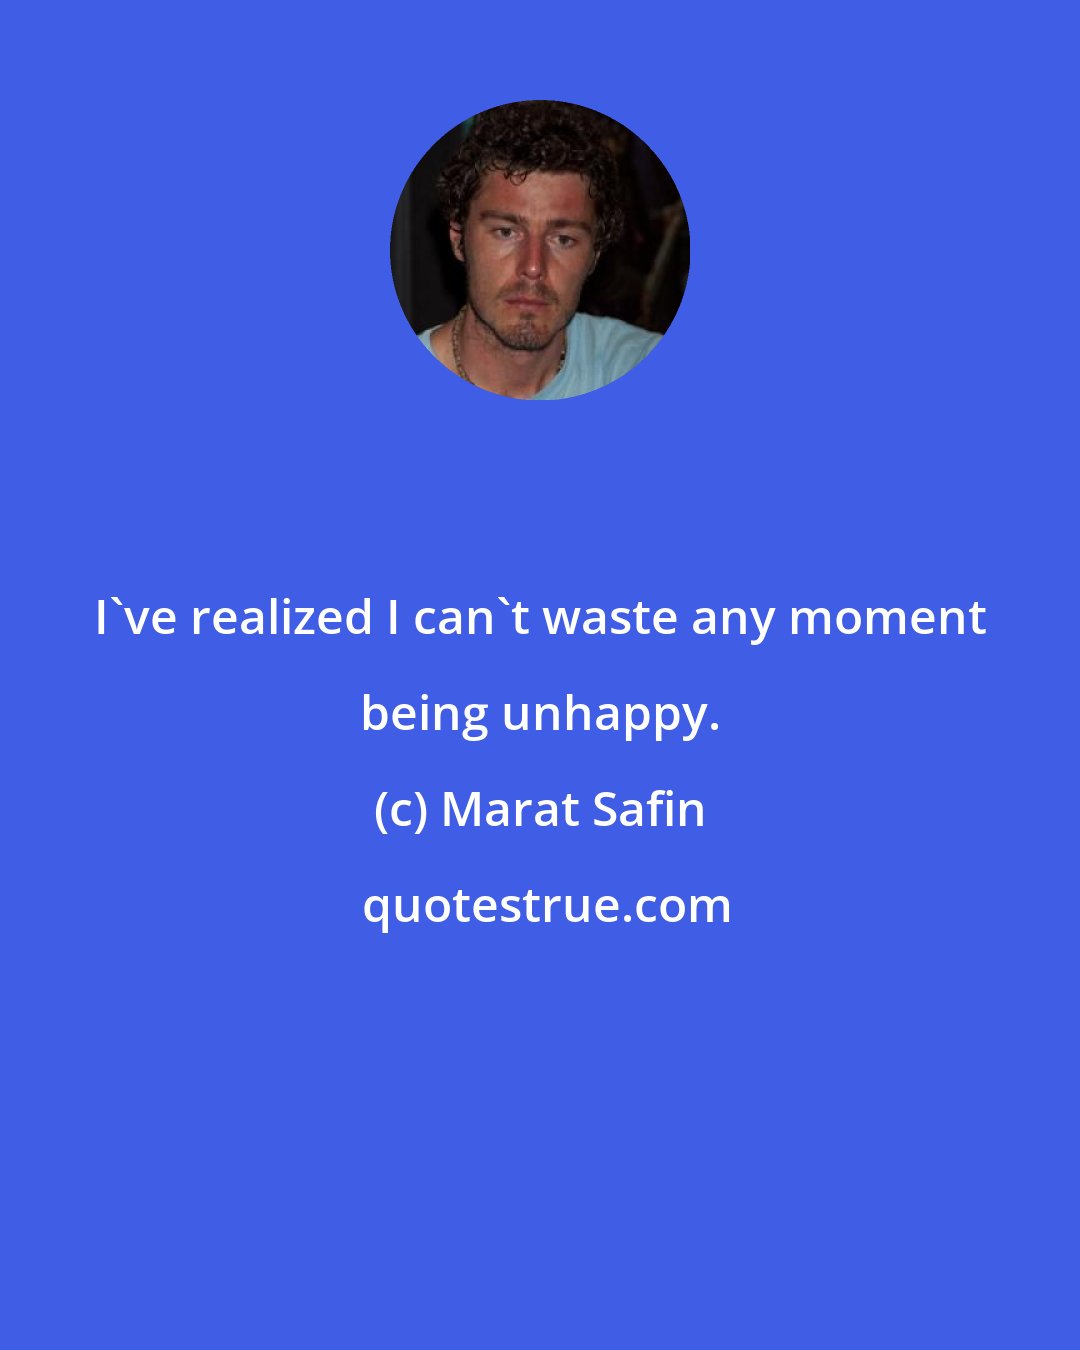 Marat Safin: I've realized I can't waste any moment being unhappy.